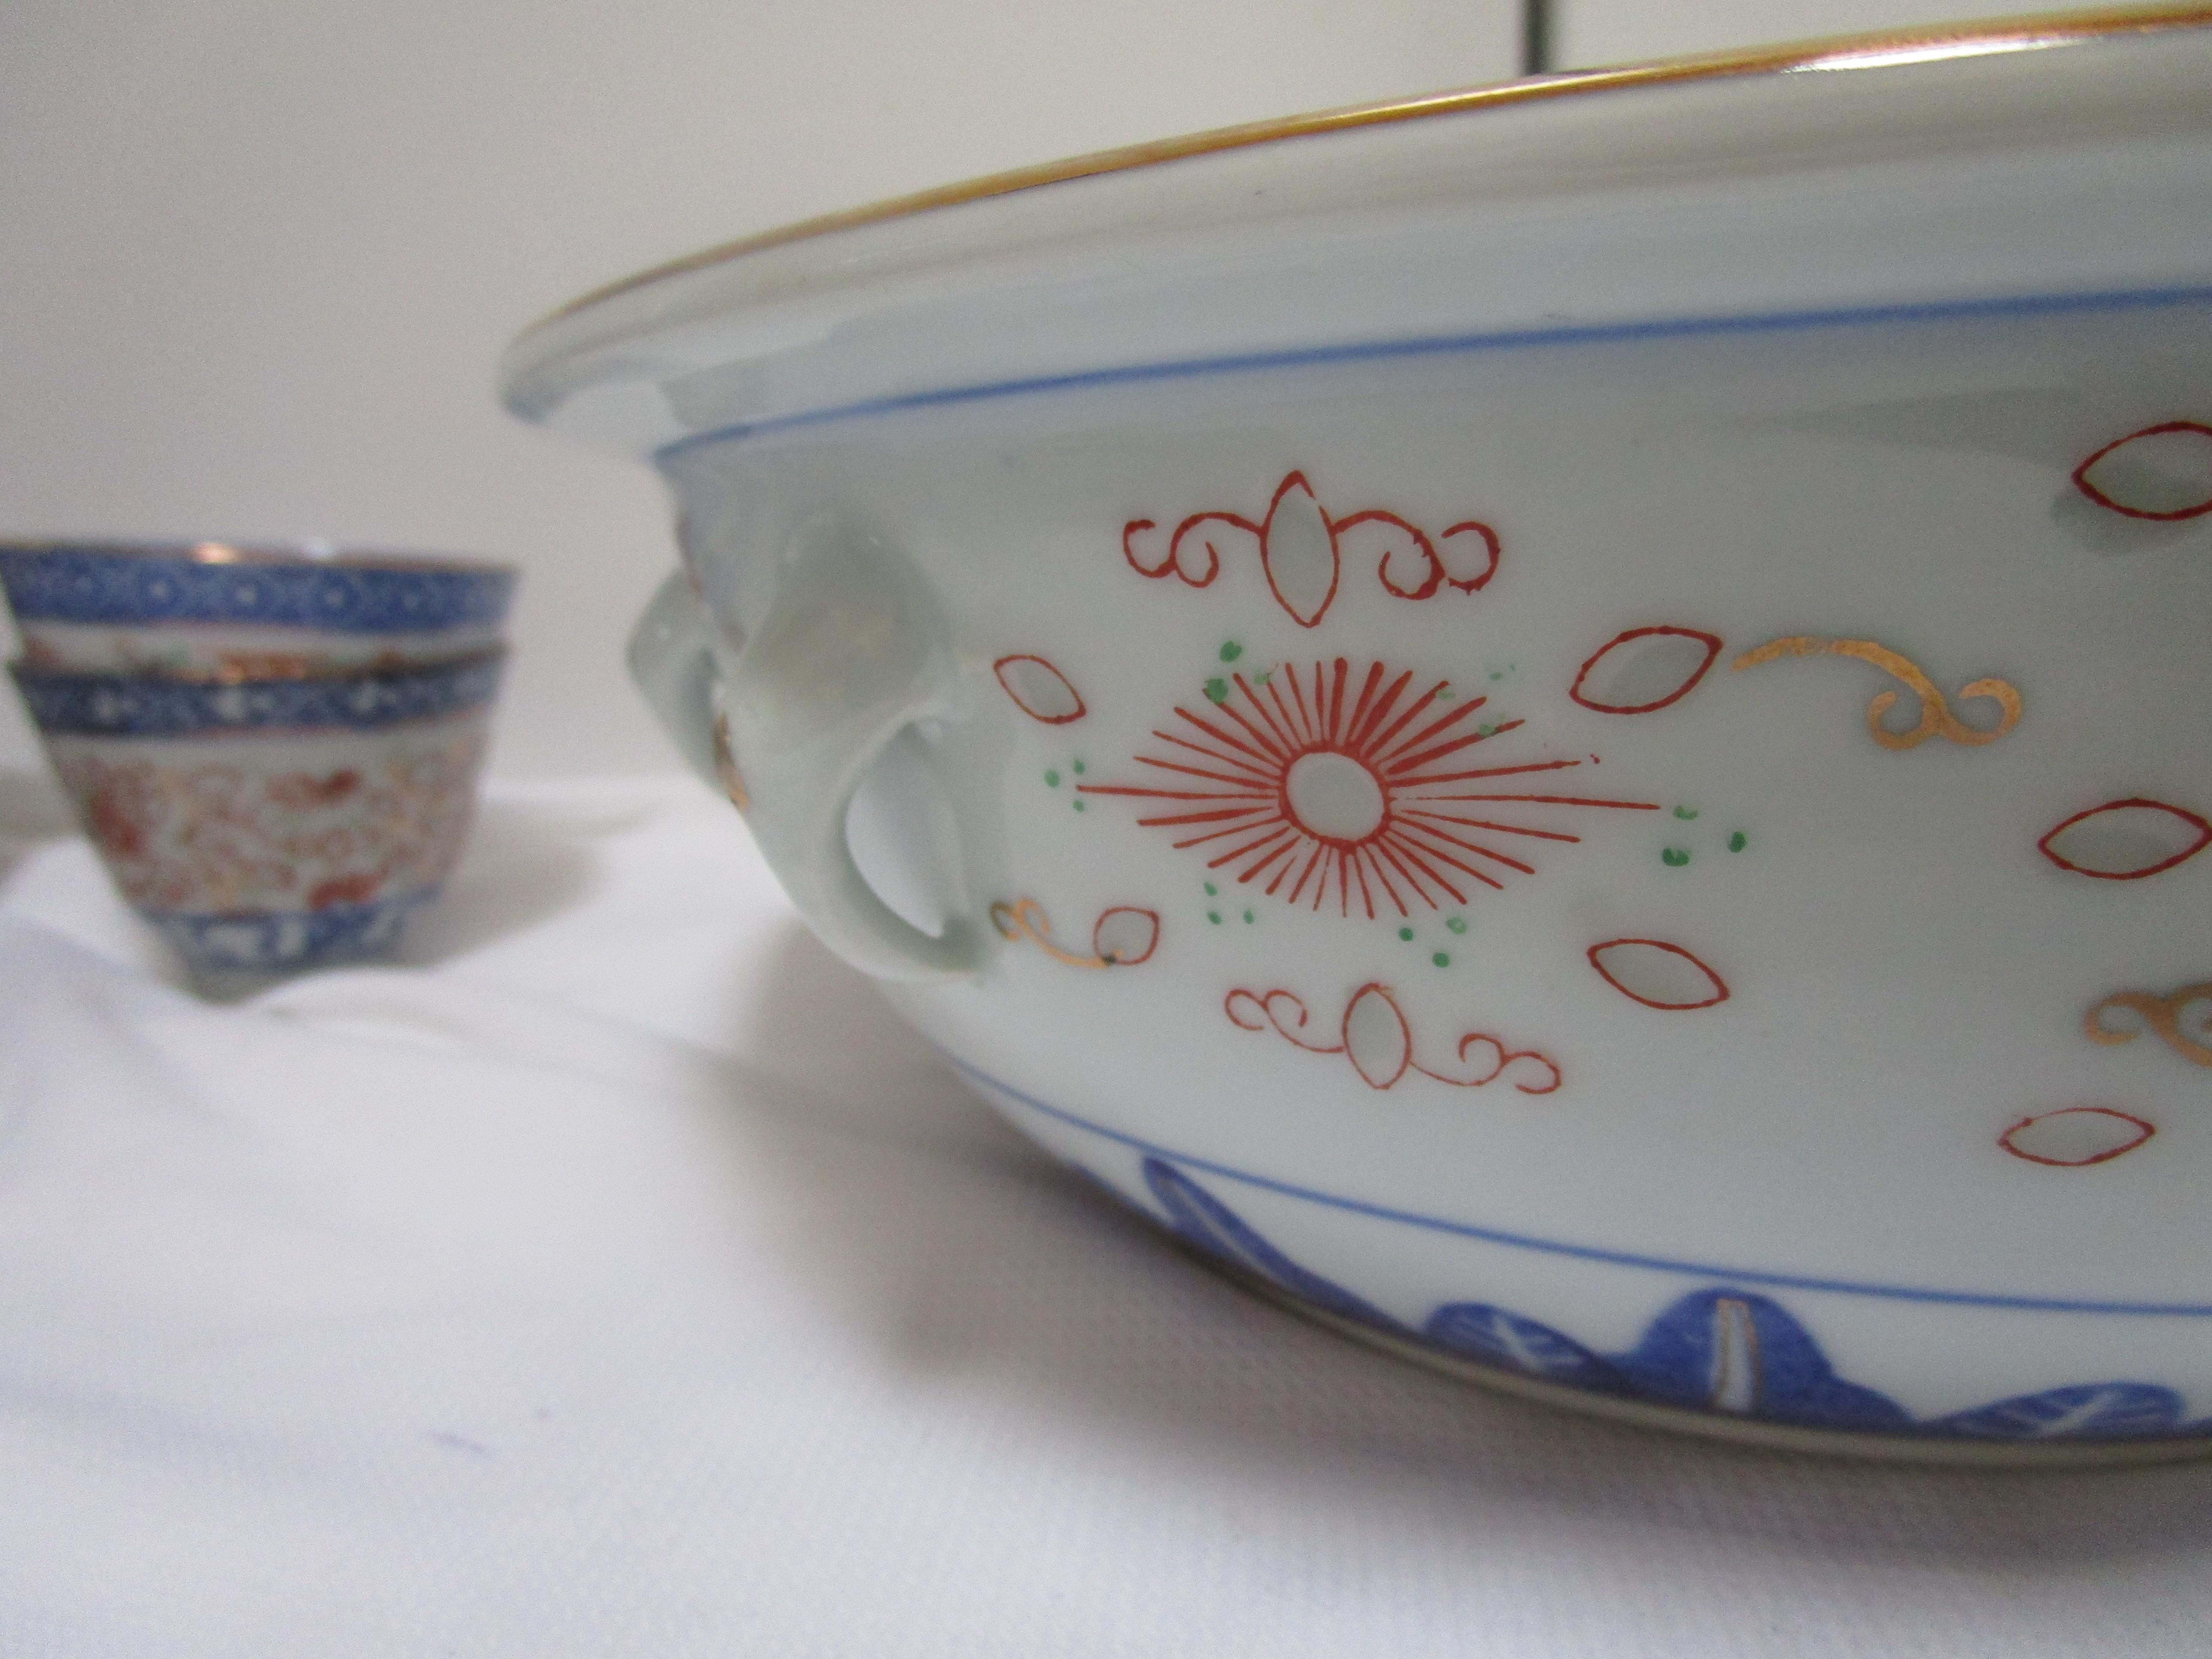 This is a special collection of blue and white rice grain porcelain serving bowls and Chinese style teacups. They are beautiful in red, blue and white translucent rice grain pattern with the lotus flower motif. The items are assembled and the